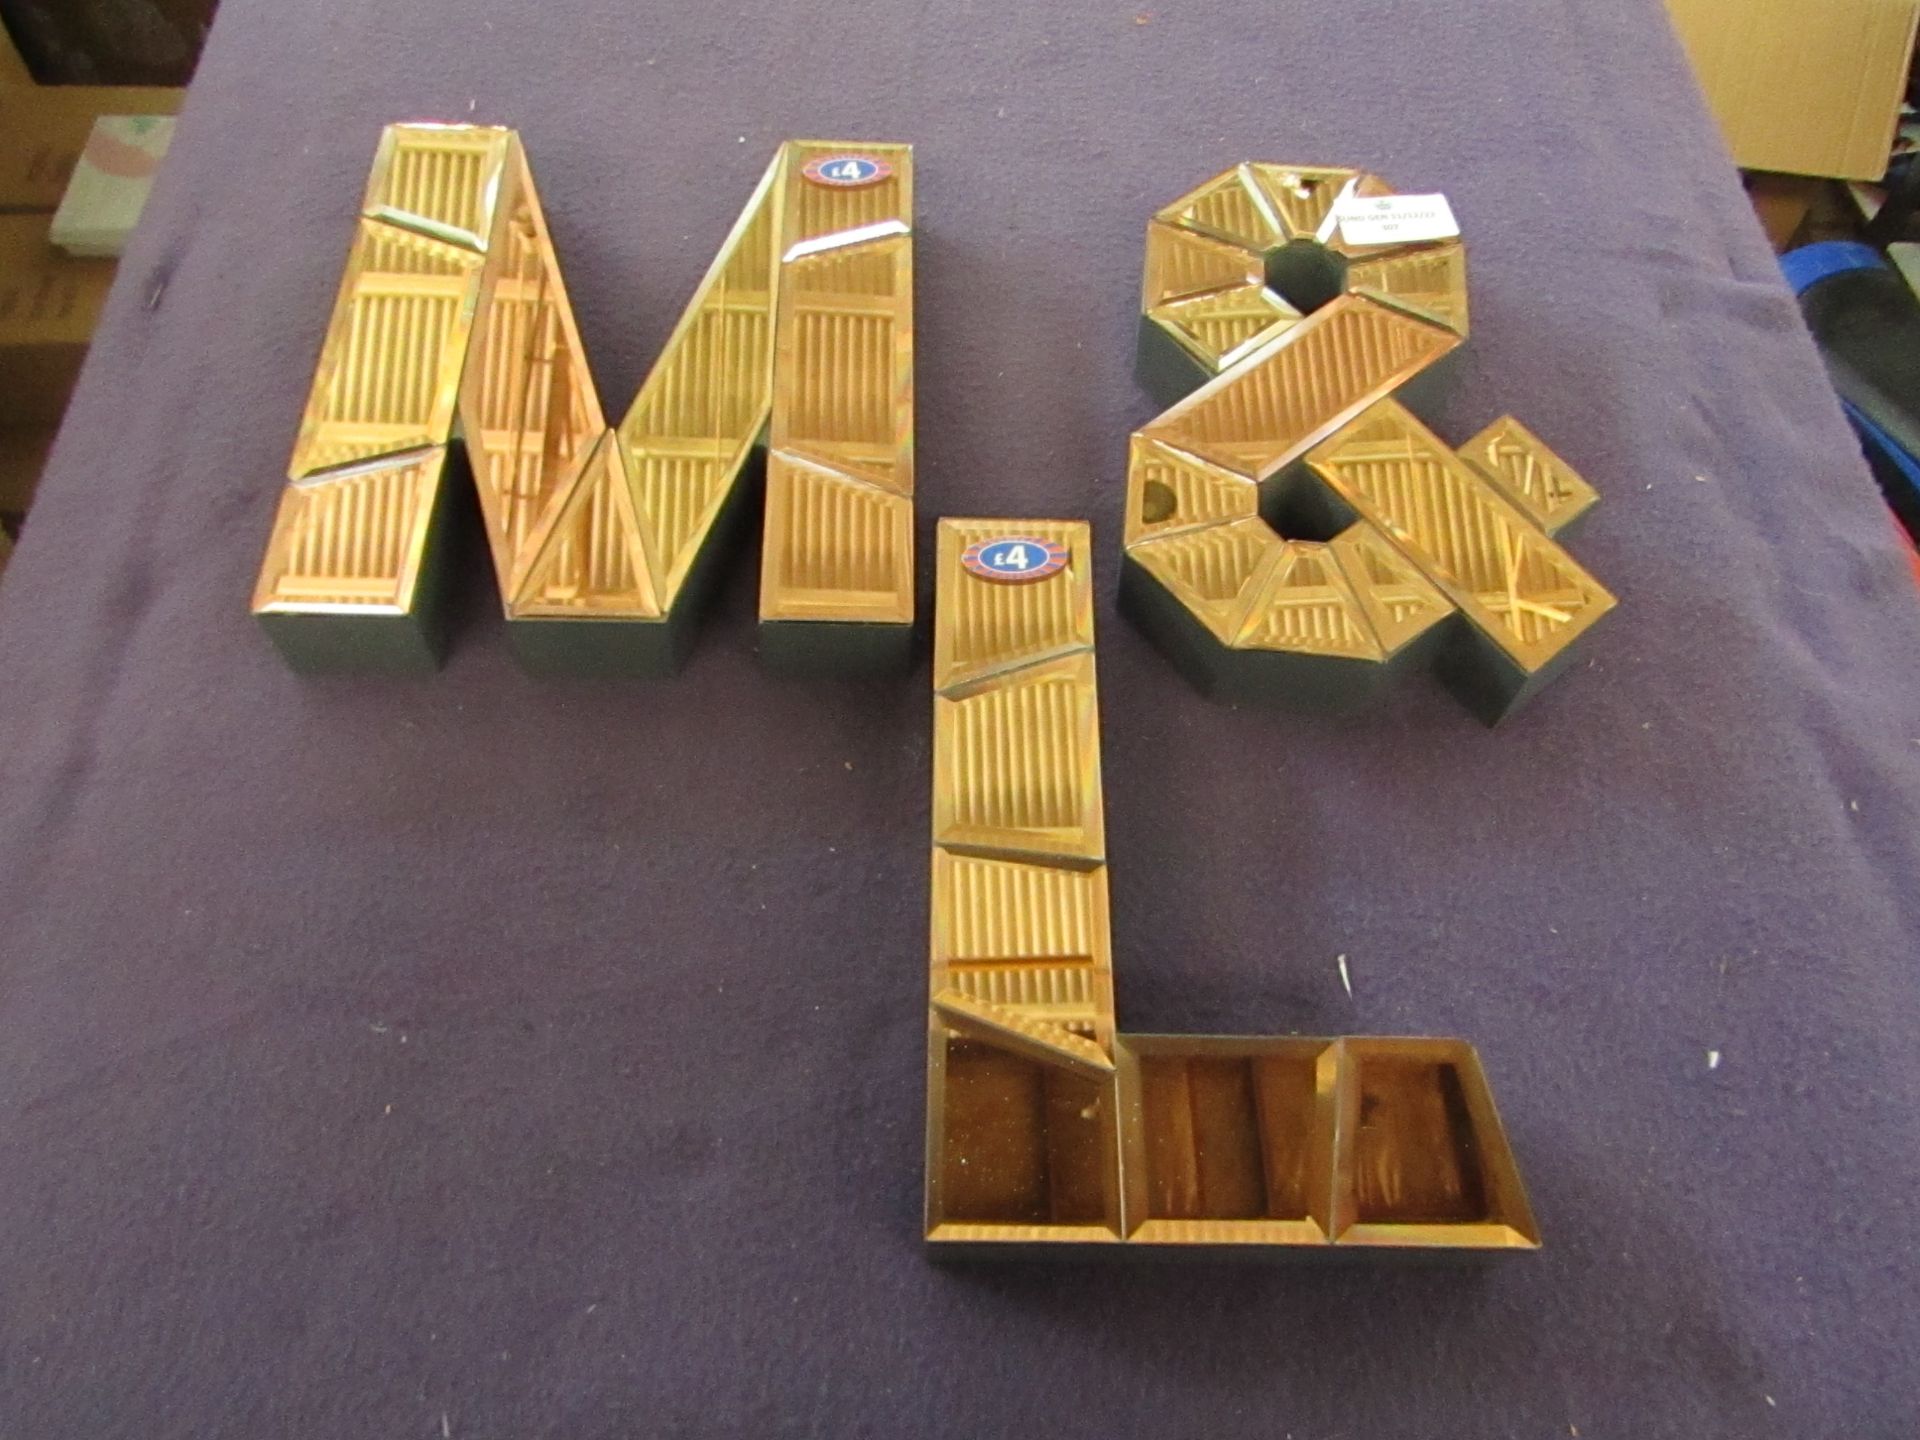 2x Various Mirror Letter Ornaments - No Packaging. 1x Symbal Mirror Ornament - No Packaging.